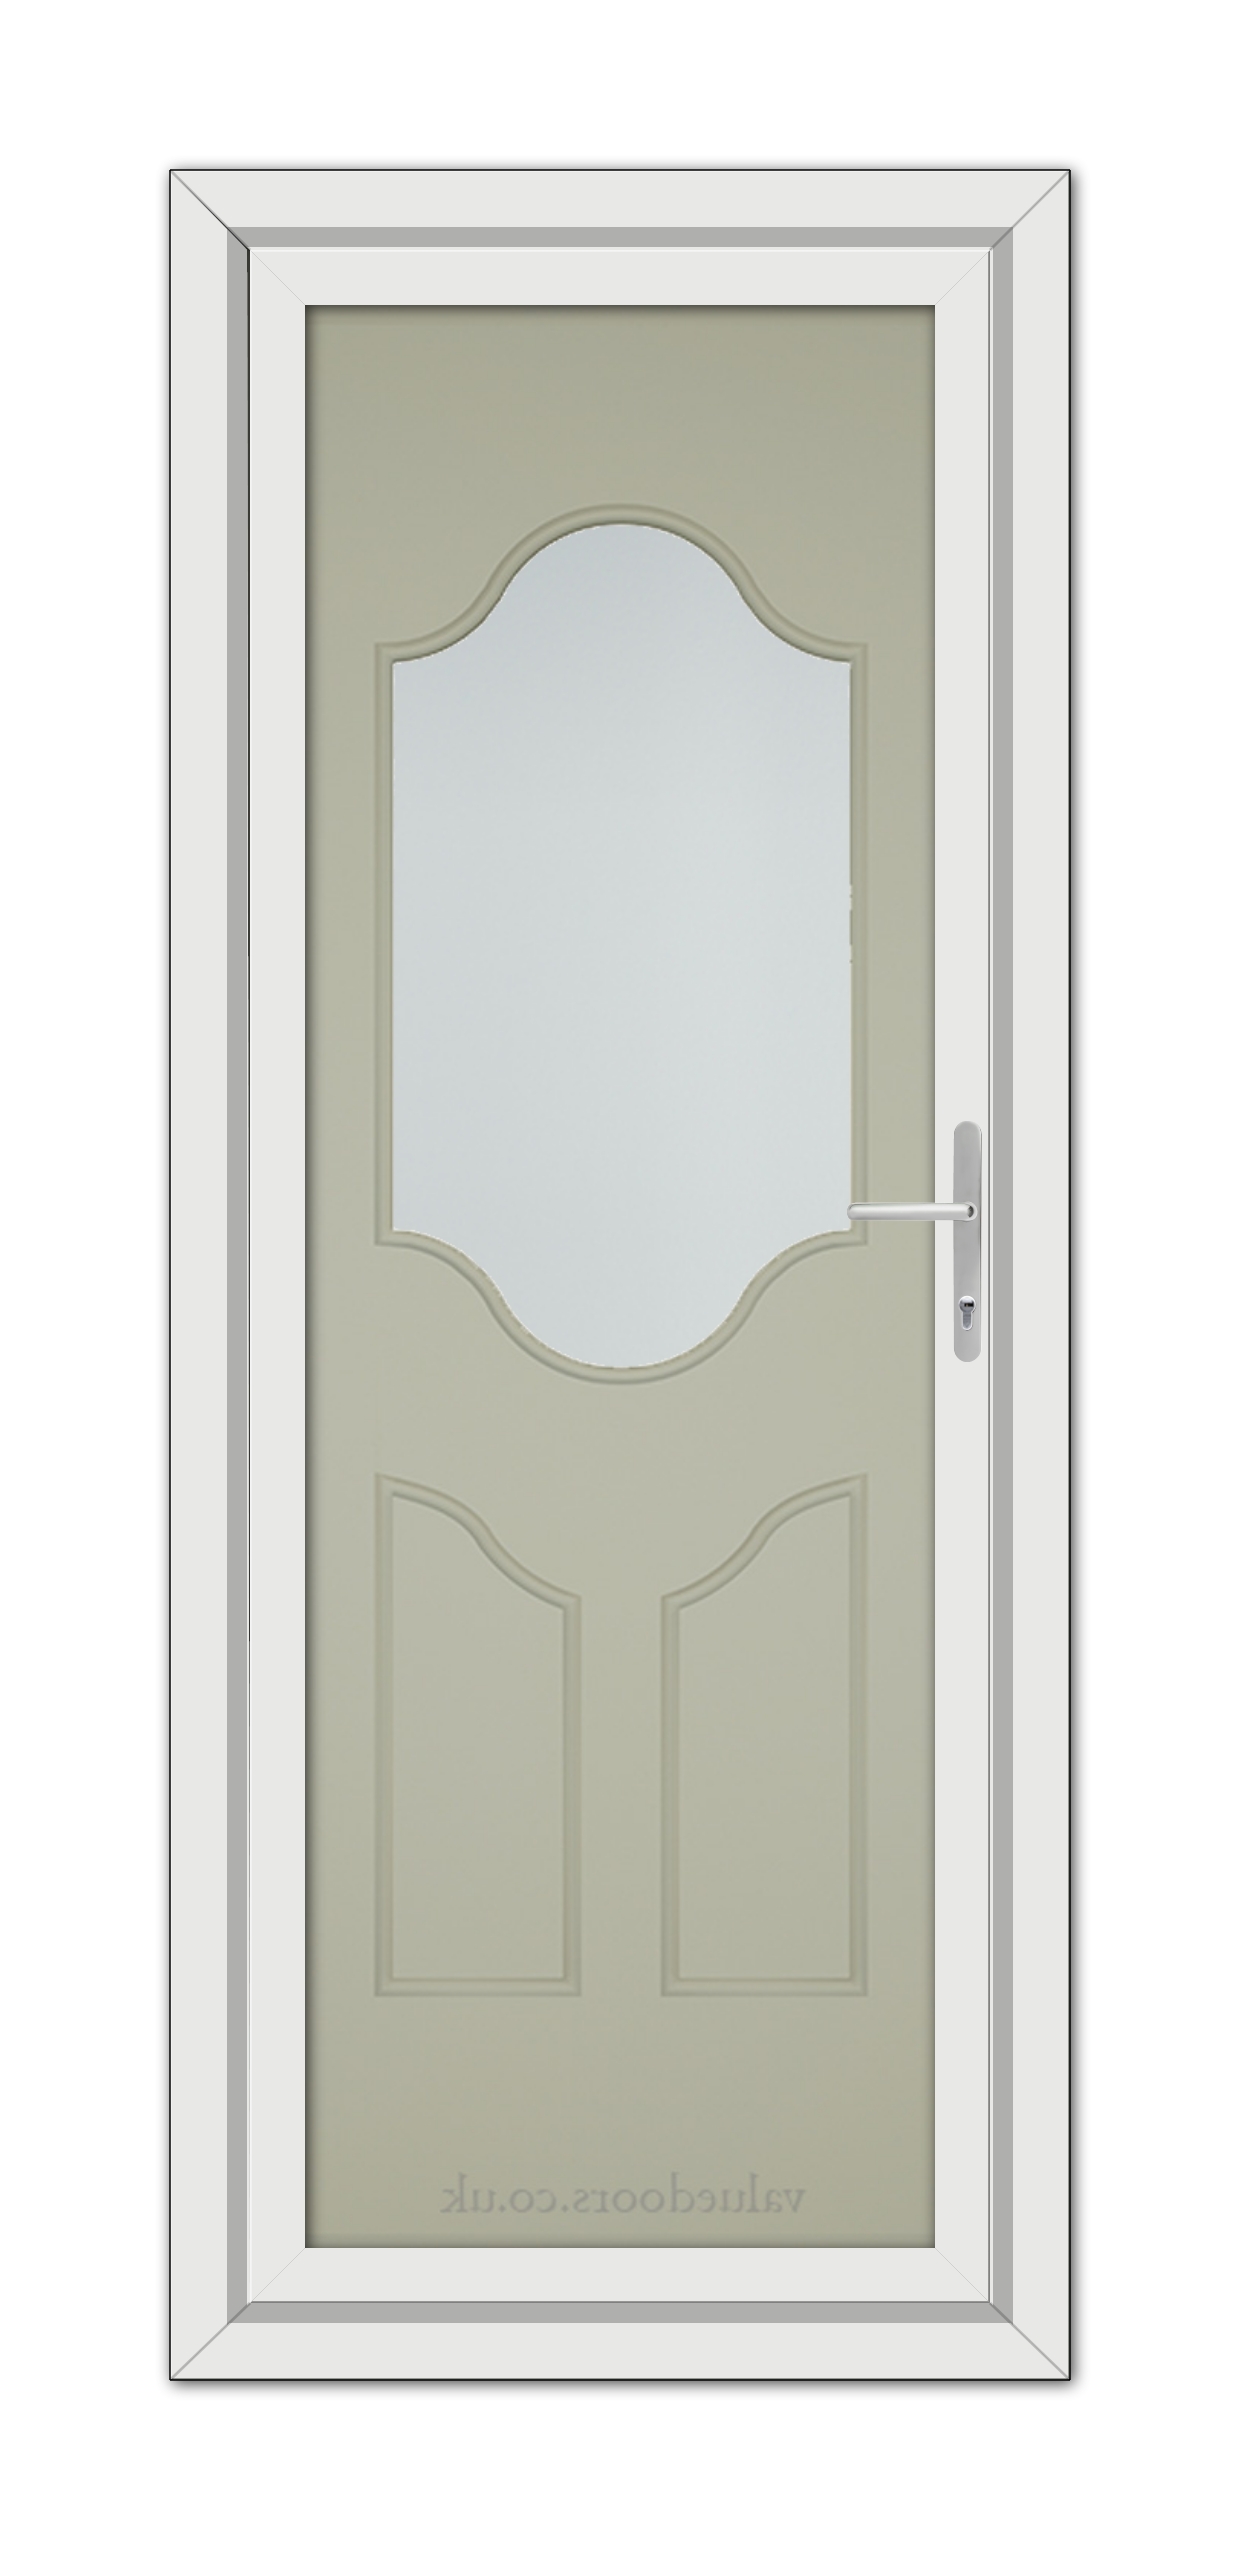 A vertical image of a closed Agate Grey Althorpe One uPVC Door with an oval glass panel at the top, set within a white frame, viewed from the front.